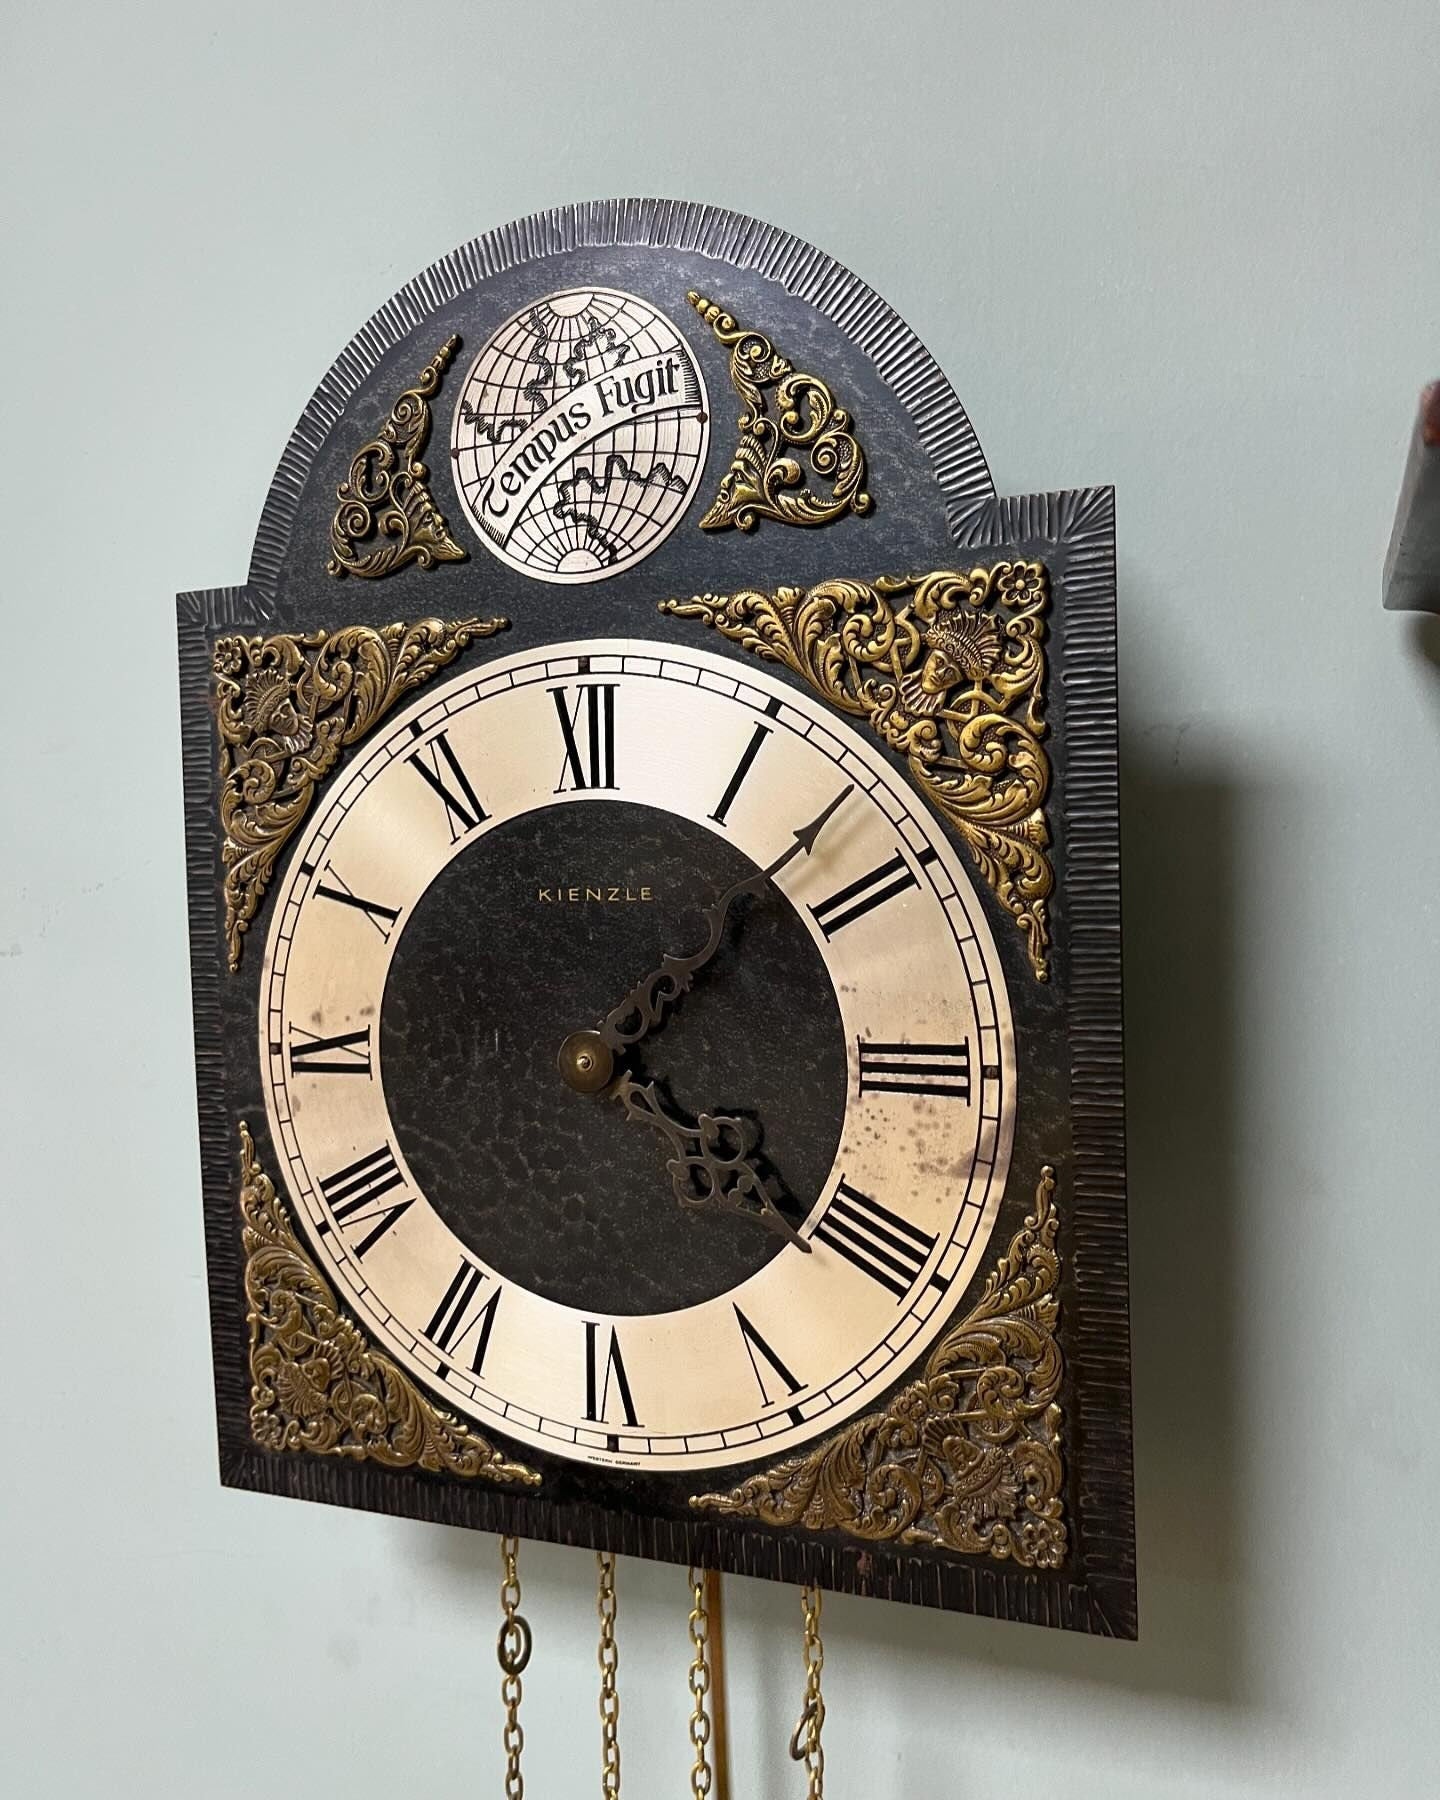 Antique German Wall Clock with Chain Wind and Gong Chime | Brass Accents | 33x25 cm